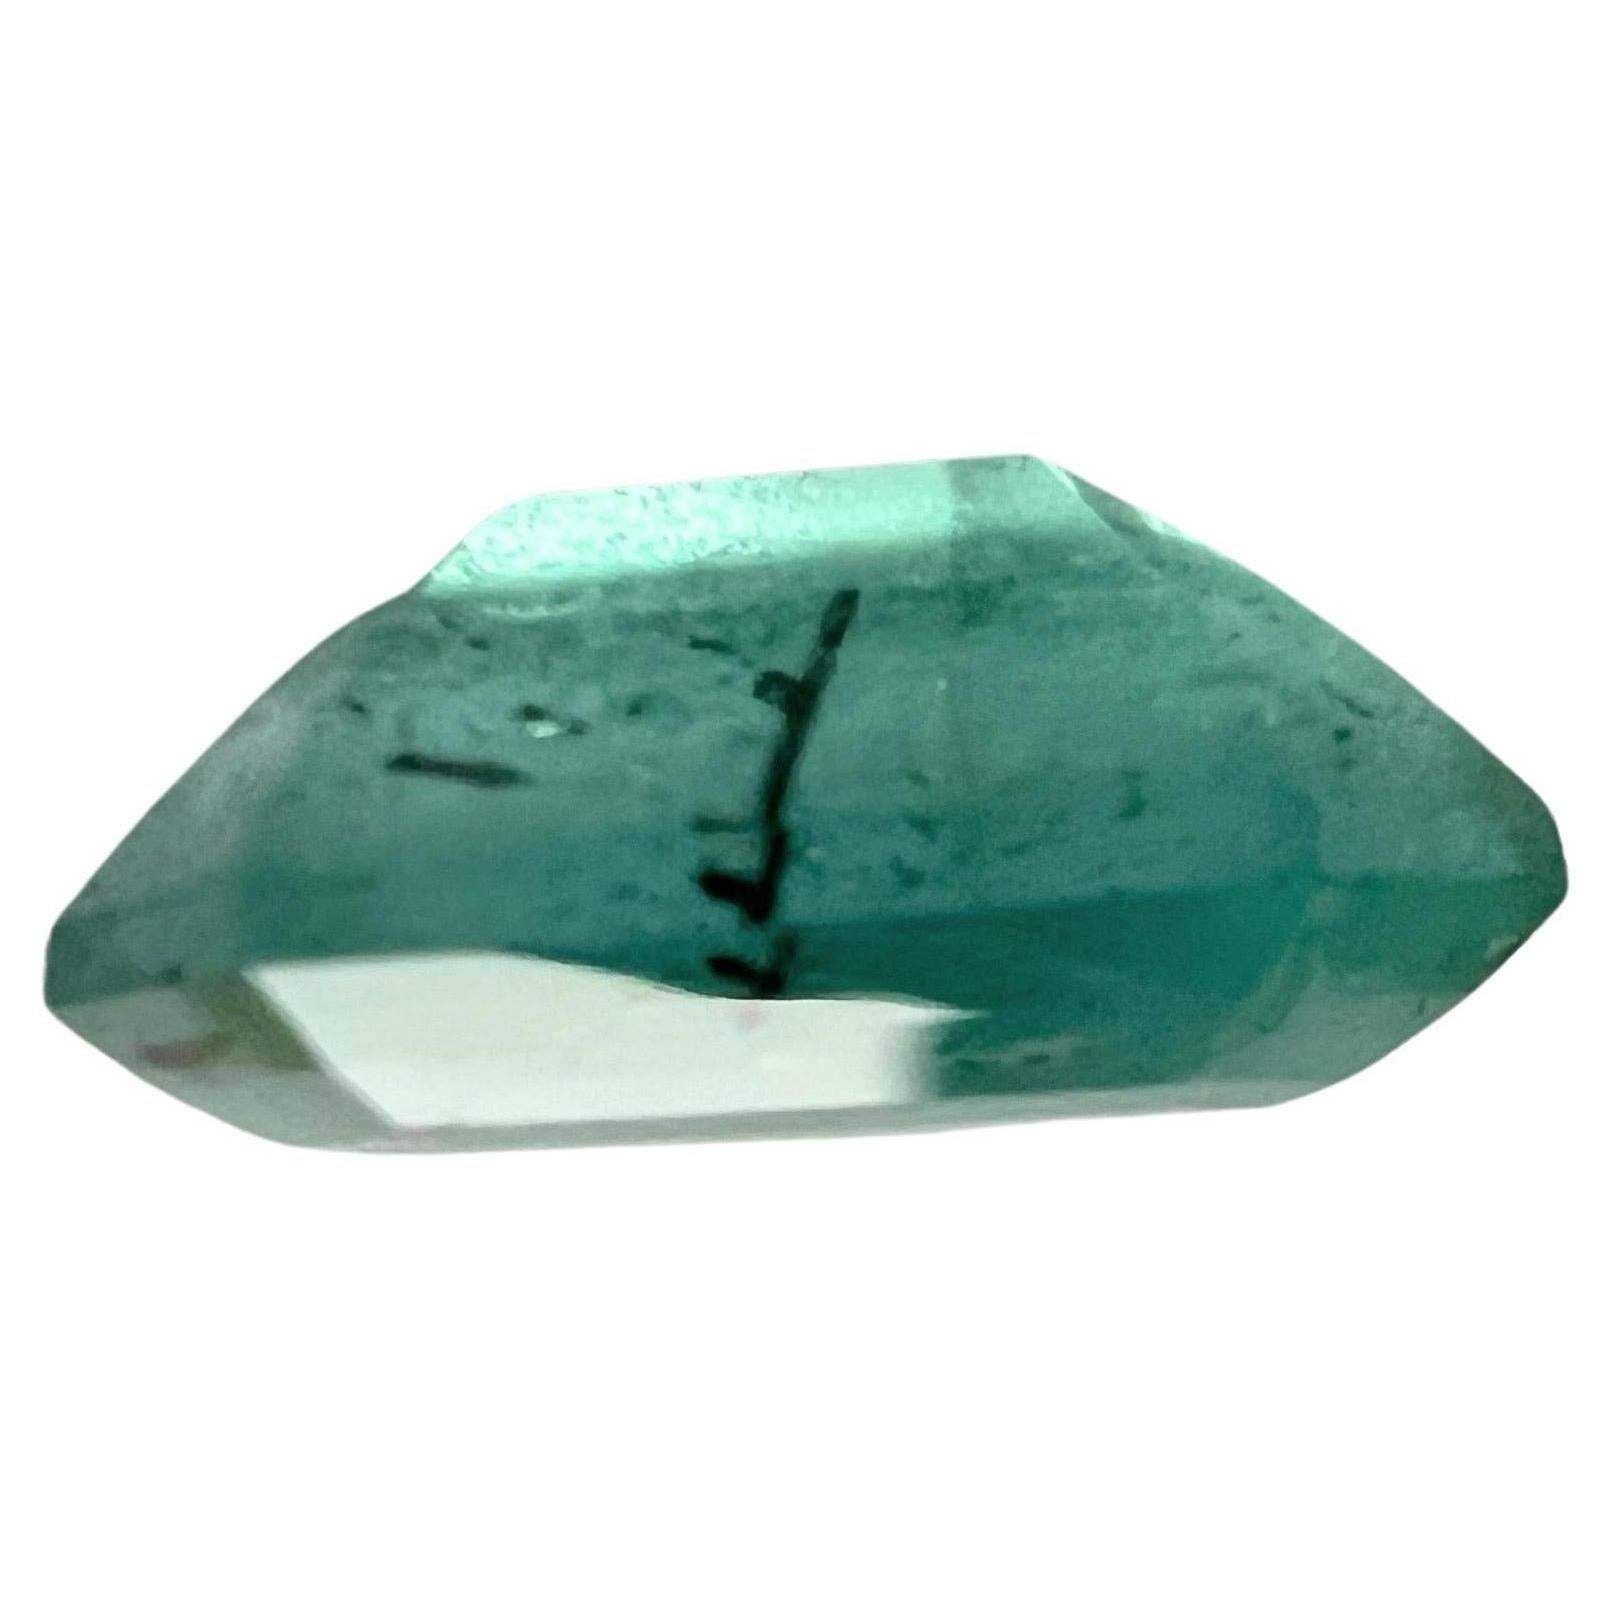 NO RESERVE 2.70ct NON-OILED NATURAL BLUE GREEN EMERALD Edelstein im Angebot 3